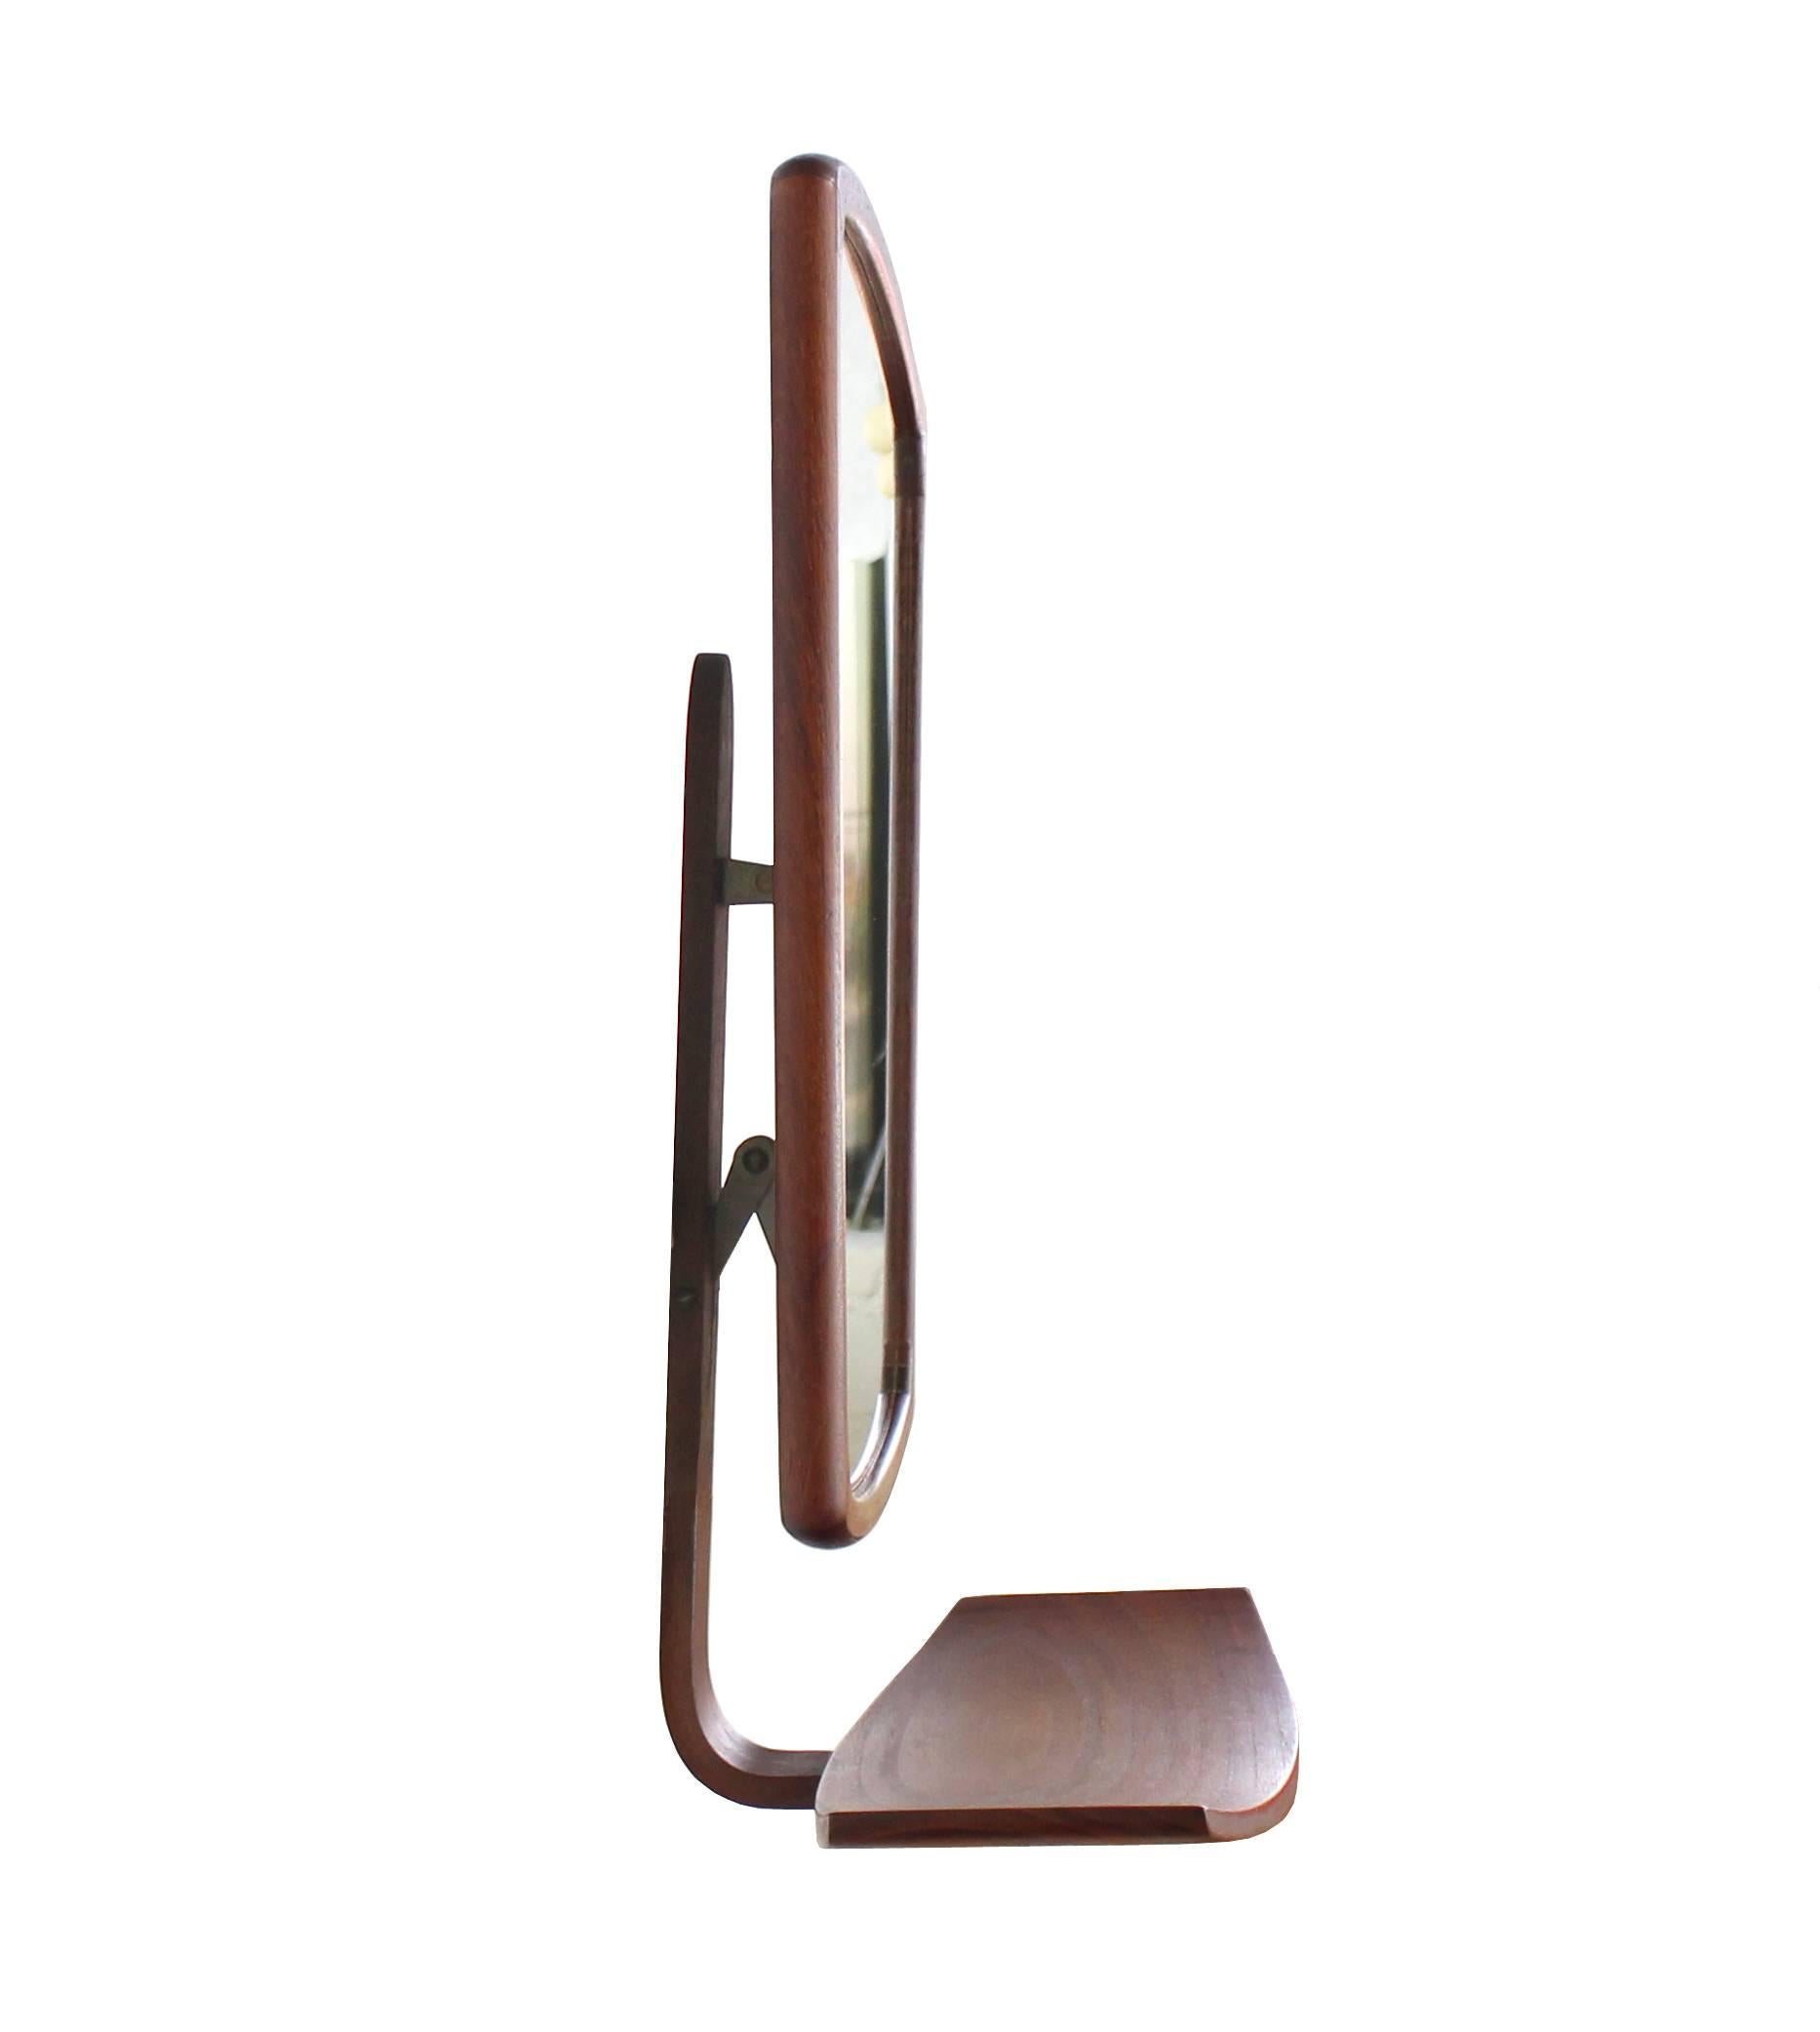 Danish Mid-Century Modern Adjustable Wall Mirror with Shelf In Excellent Condition For Sale In Rockaway, NJ